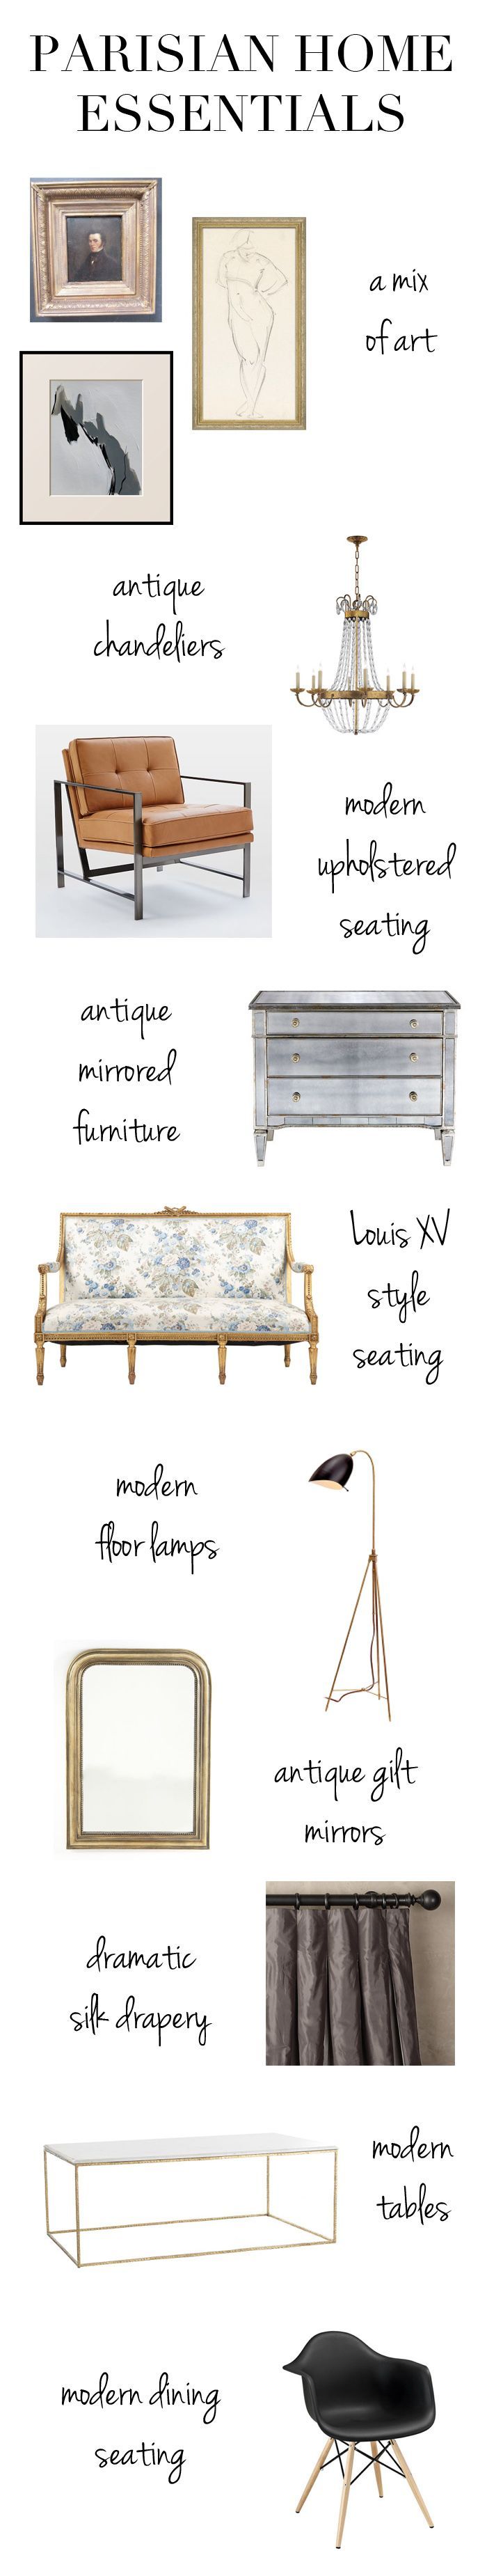 Elements of Style Blog | Parisian Style at Home and On You! | http://www.elementsofstyleblog.com